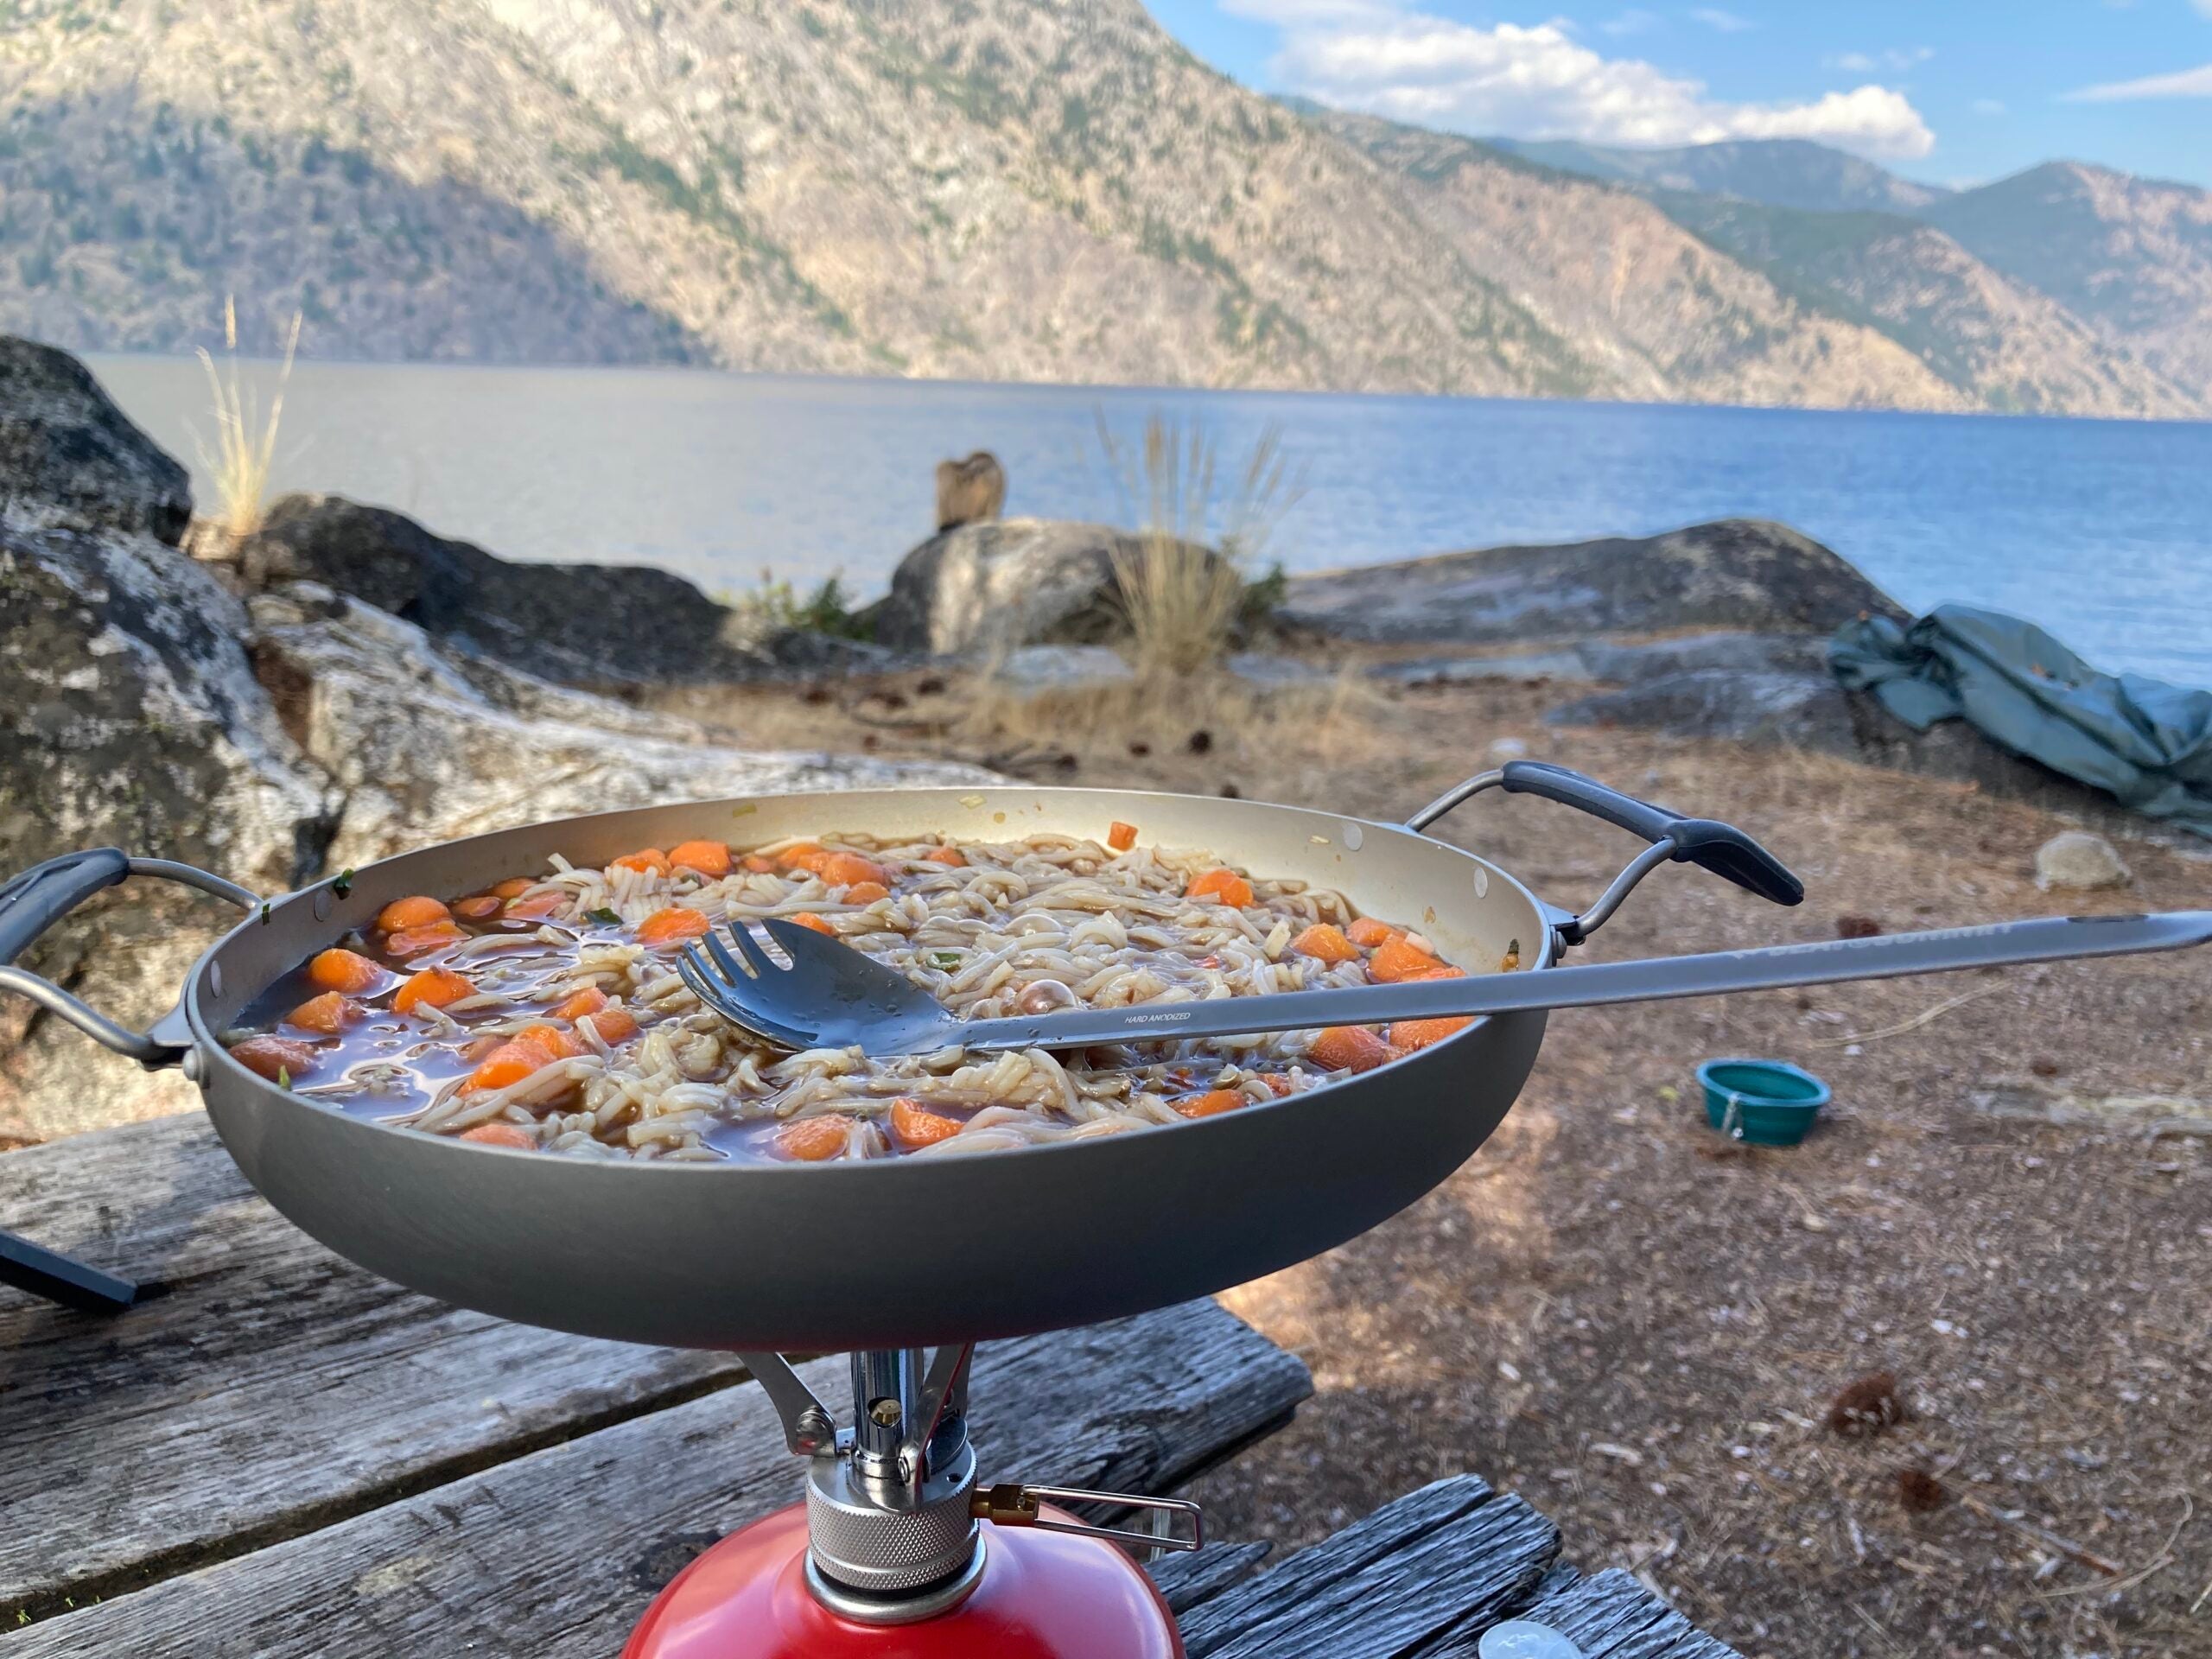 A frying pan with rice and vegetables cooking over a camping stove.